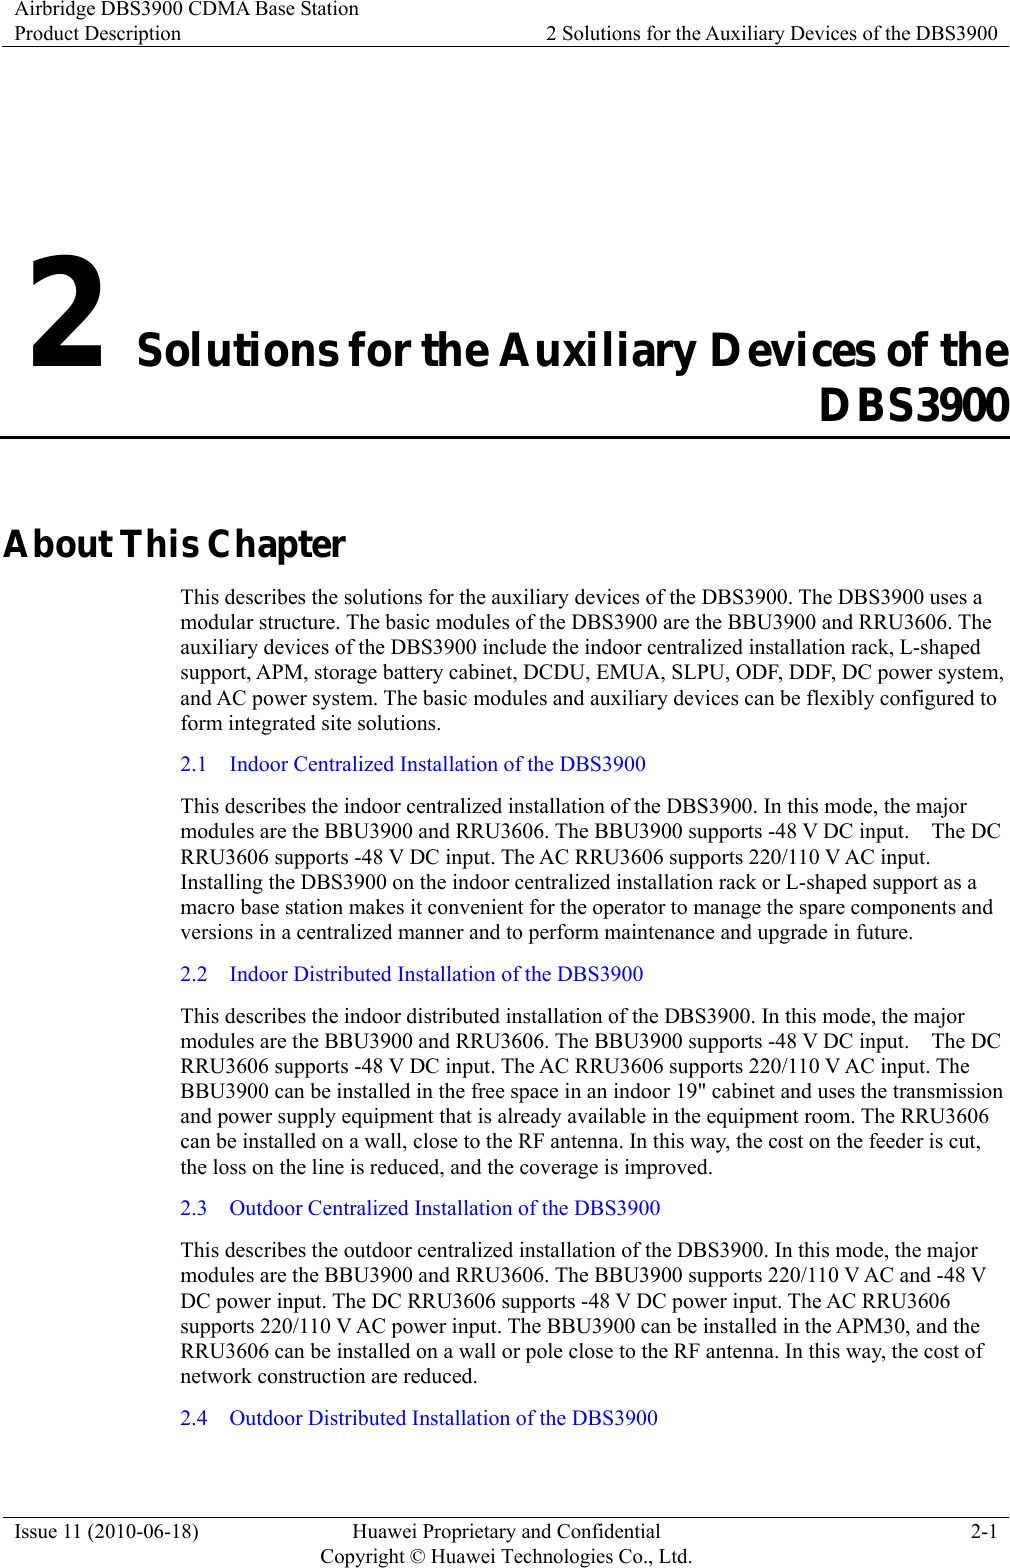 Airbridge DBS3900 CDMA Base Station Product Description  2 Solutions for the Auxiliary Devices of the DBS3900 Issue 11 (2010-06-18)  Huawei Proprietary and Confidential         Copyright © Huawei Technologies Co., Ltd.2-1 2 Solutions for the Auxiliary Devices of the DBS3900 About This Chapter This describes the solutions for the auxiliary devices of the DBS3900. The DBS3900 uses a modular structure. The basic modules of the DBS3900 are the BBU3900 and RRU3606. The auxiliary devices of the DBS3900 include the indoor centralized installation rack, L-shaped support, APM, storage battery cabinet, DCDU, EMUA, SLPU, ODF, DDF, DC power system, and AC power system. The basic modules and auxiliary devices can be flexibly configured to form integrated site solutions. 2.1    Indoor Centralized Installation of the DBS3900 This describes the indoor centralized installation of the DBS3900. In this mode, the major modules are the BBU3900 and RRU3606. The BBU3900 supports -48 V DC input.    The DC RRU3606 supports -48 V DC input. The AC RRU3606 supports 220/110 V AC input. Installing the DBS3900 on the indoor centralized installation rack or L-shaped support as a macro base station makes it convenient for the operator to manage the spare components and versions in a centralized manner and to perform maintenance and upgrade in future. 2.2    Indoor Distributed Installation of the DBS3900 This describes the indoor distributed installation of the DBS3900. In this mode, the major modules are the BBU3900 and RRU3606. The BBU3900 supports -48 V DC input.    The DC RRU3606 supports -48 V DC input. The AC RRU3606 supports 220/110 V AC input. The BBU3900 can be installed in the free space in an indoor 19&quot; cabinet and uses the transmission and power supply equipment that is already available in the equipment room. The RRU3606 can be installed on a wall, close to the RF antenna. In this way, the cost on the feeder is cut, the loss on the line is reduced, and the coverage is improved. 2.3    Outdoor Centralized Installation of the DBS3900 This describes the outdoor centralized installation of the DBS3900. In this mode, the major modules are the BBU3900 and RRU3606. The BBU3900 supports 220/110 V AC and -48 V DC power input. The DC RRU3606 supports -48 V DC power input. The AC RRU3606 supports 220/110 V AC power input. The BBU3900 can be installed in the APM30, and the RRU3606 can be installed on a wall or pole close to the RF antenna. In this way, the cost of network construction are reduced. 2.4    Outdoor Distributed Installation of the DBS3900 